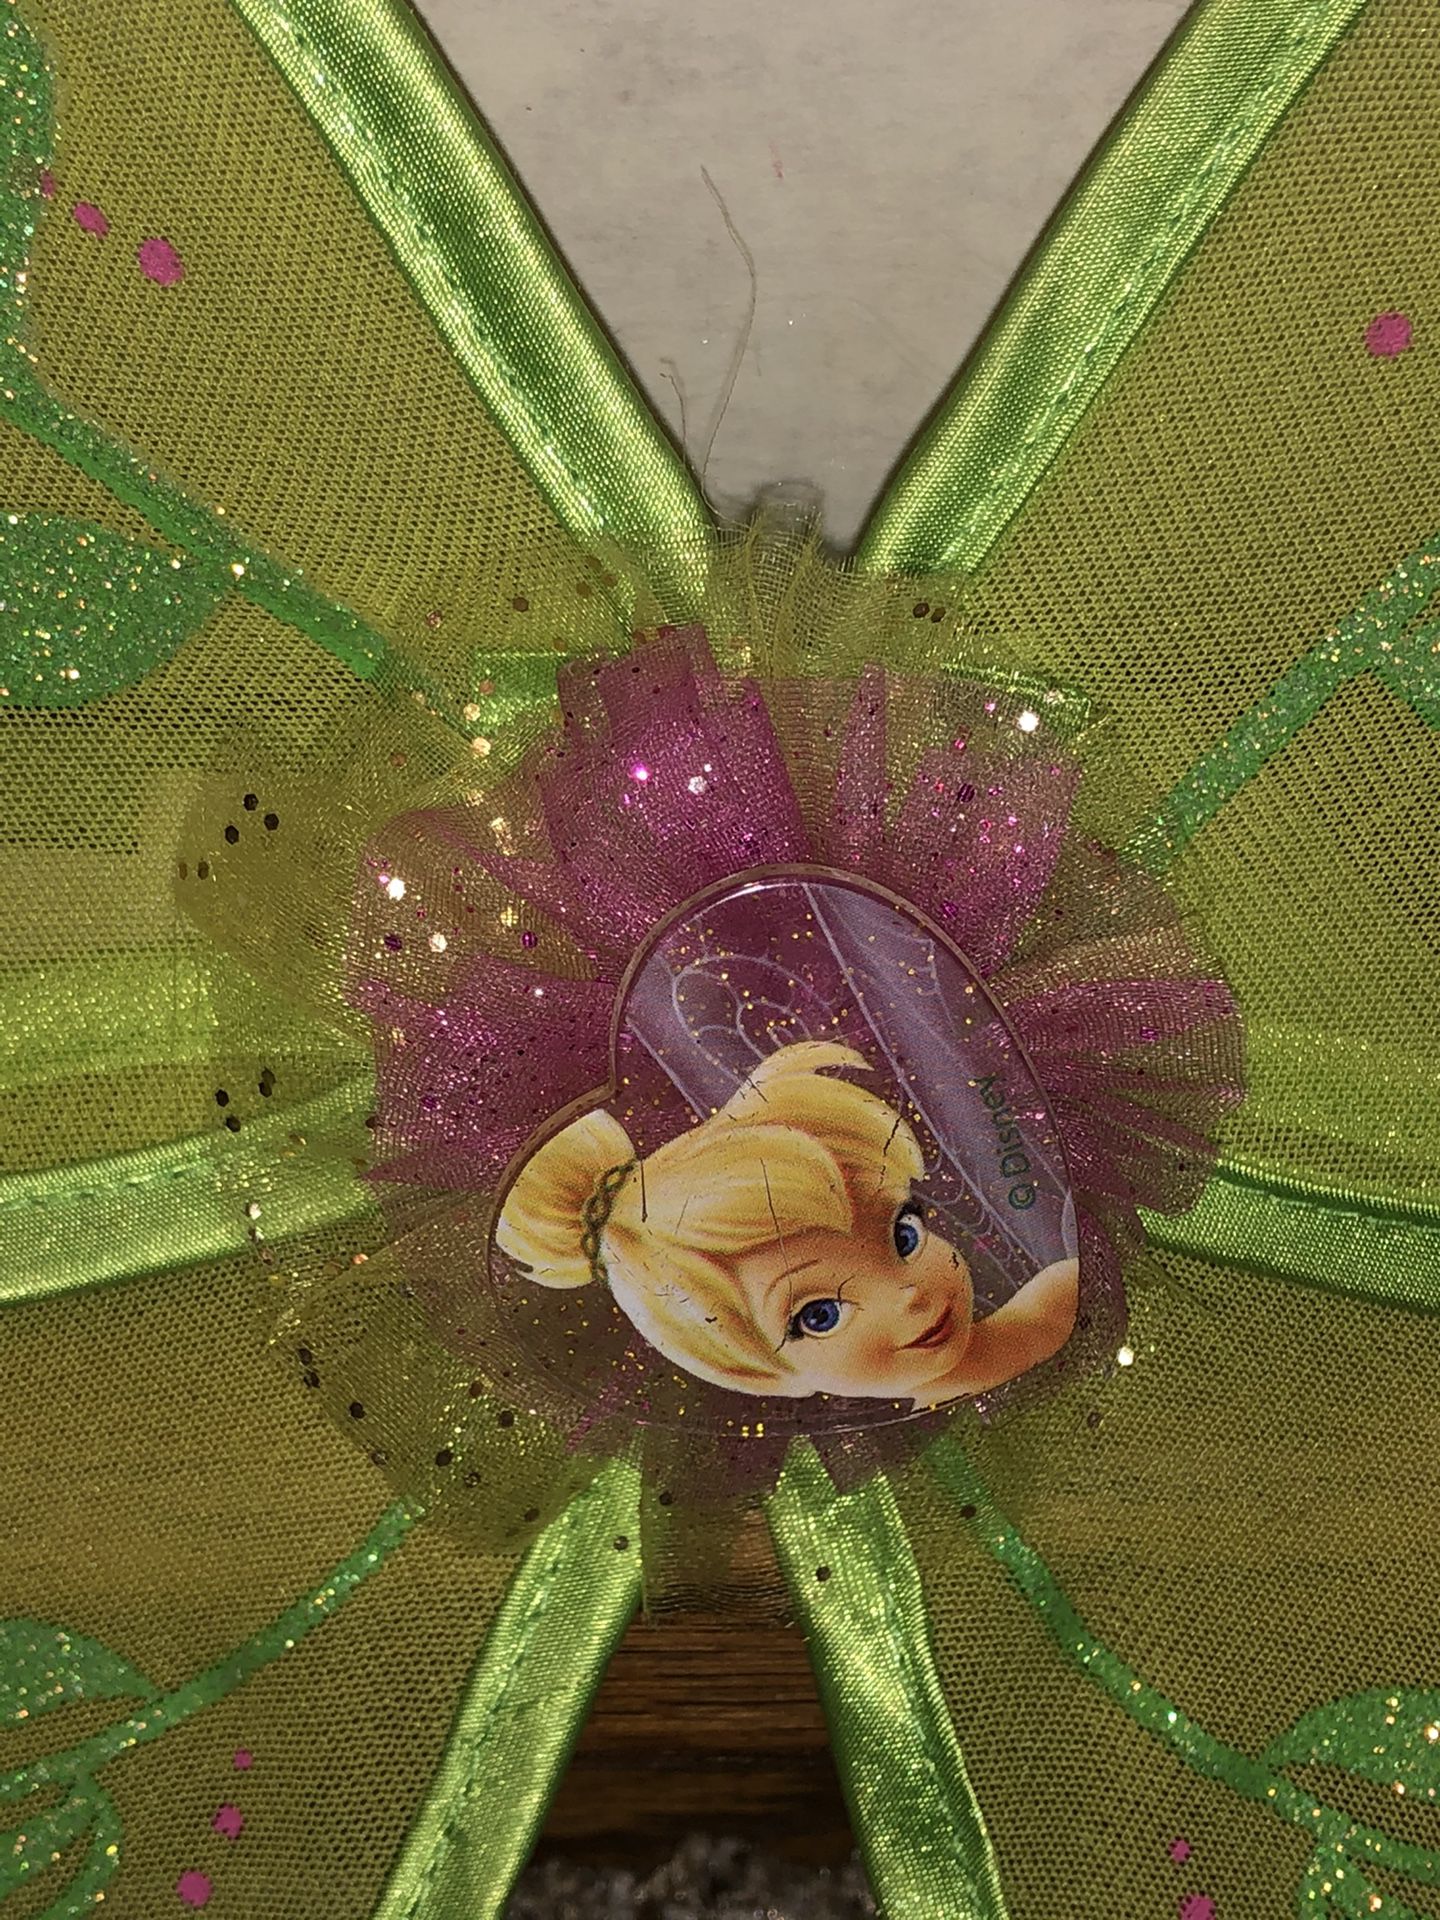 Disney fairies 🧚🏻‍♂️ Tinkerbell dress up wings for costume and play !